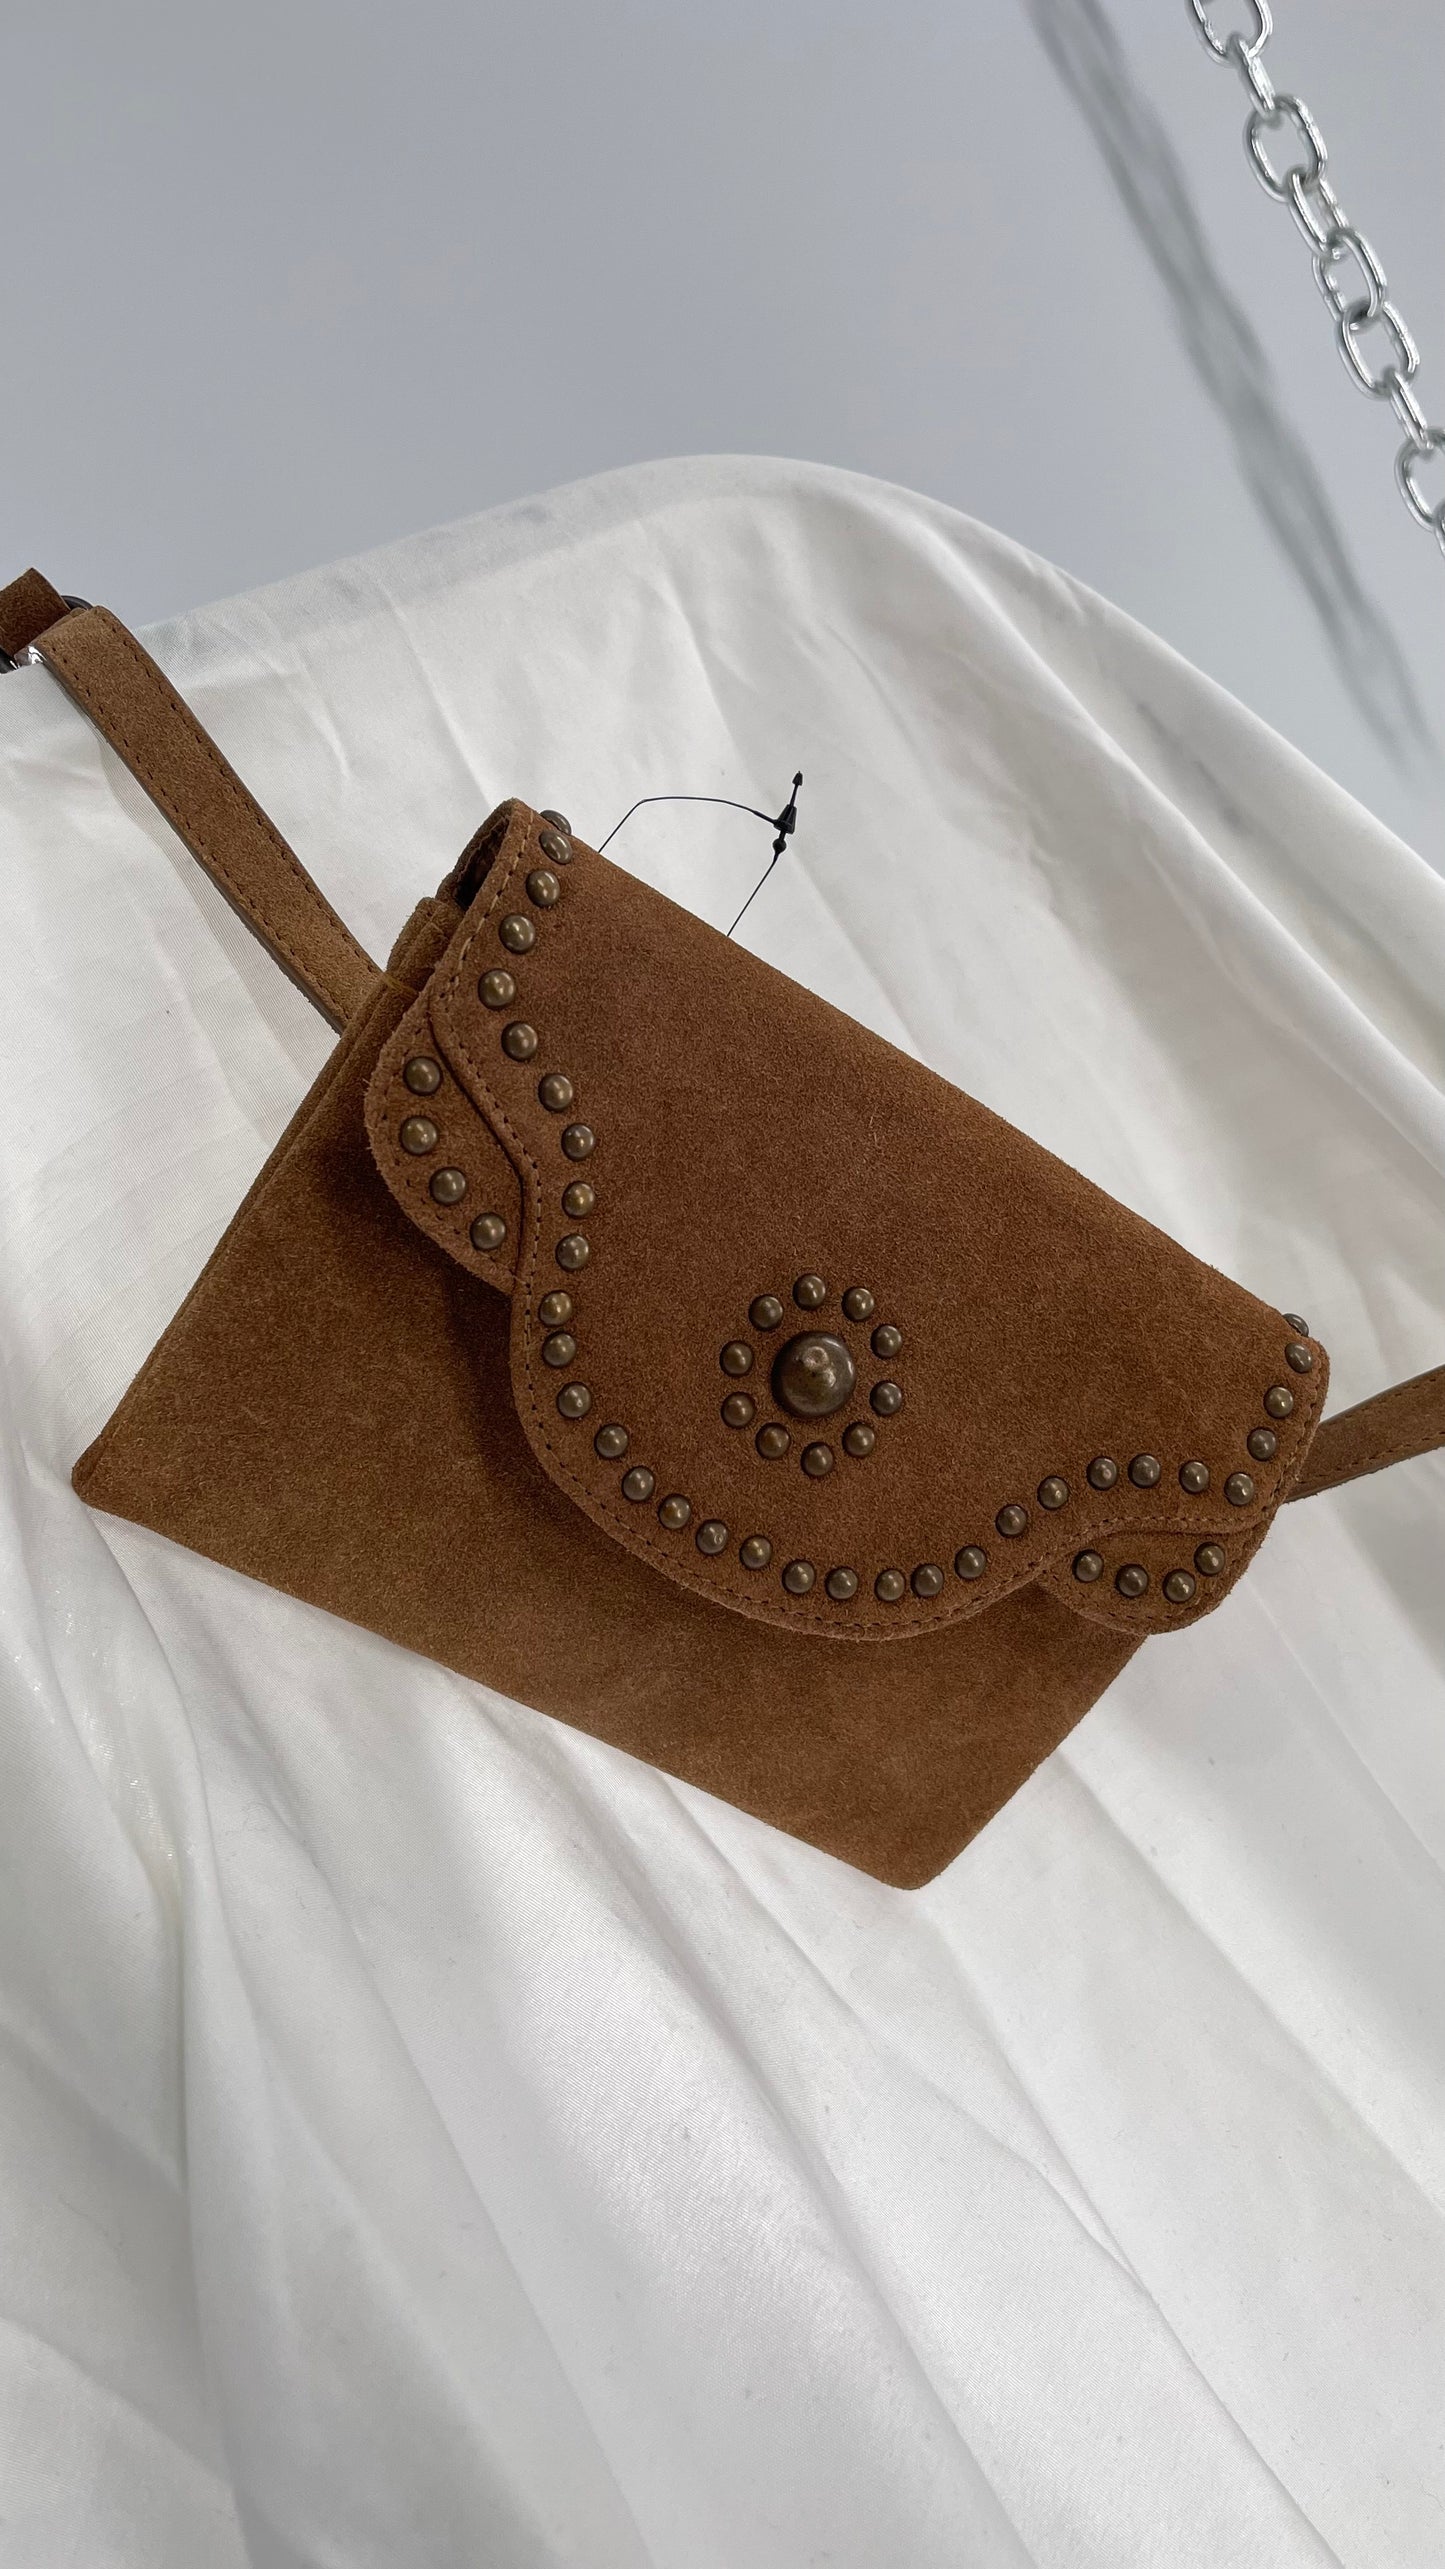 Free People Brown Leather Studded Fanny Pack / Waist Belt and Satchel